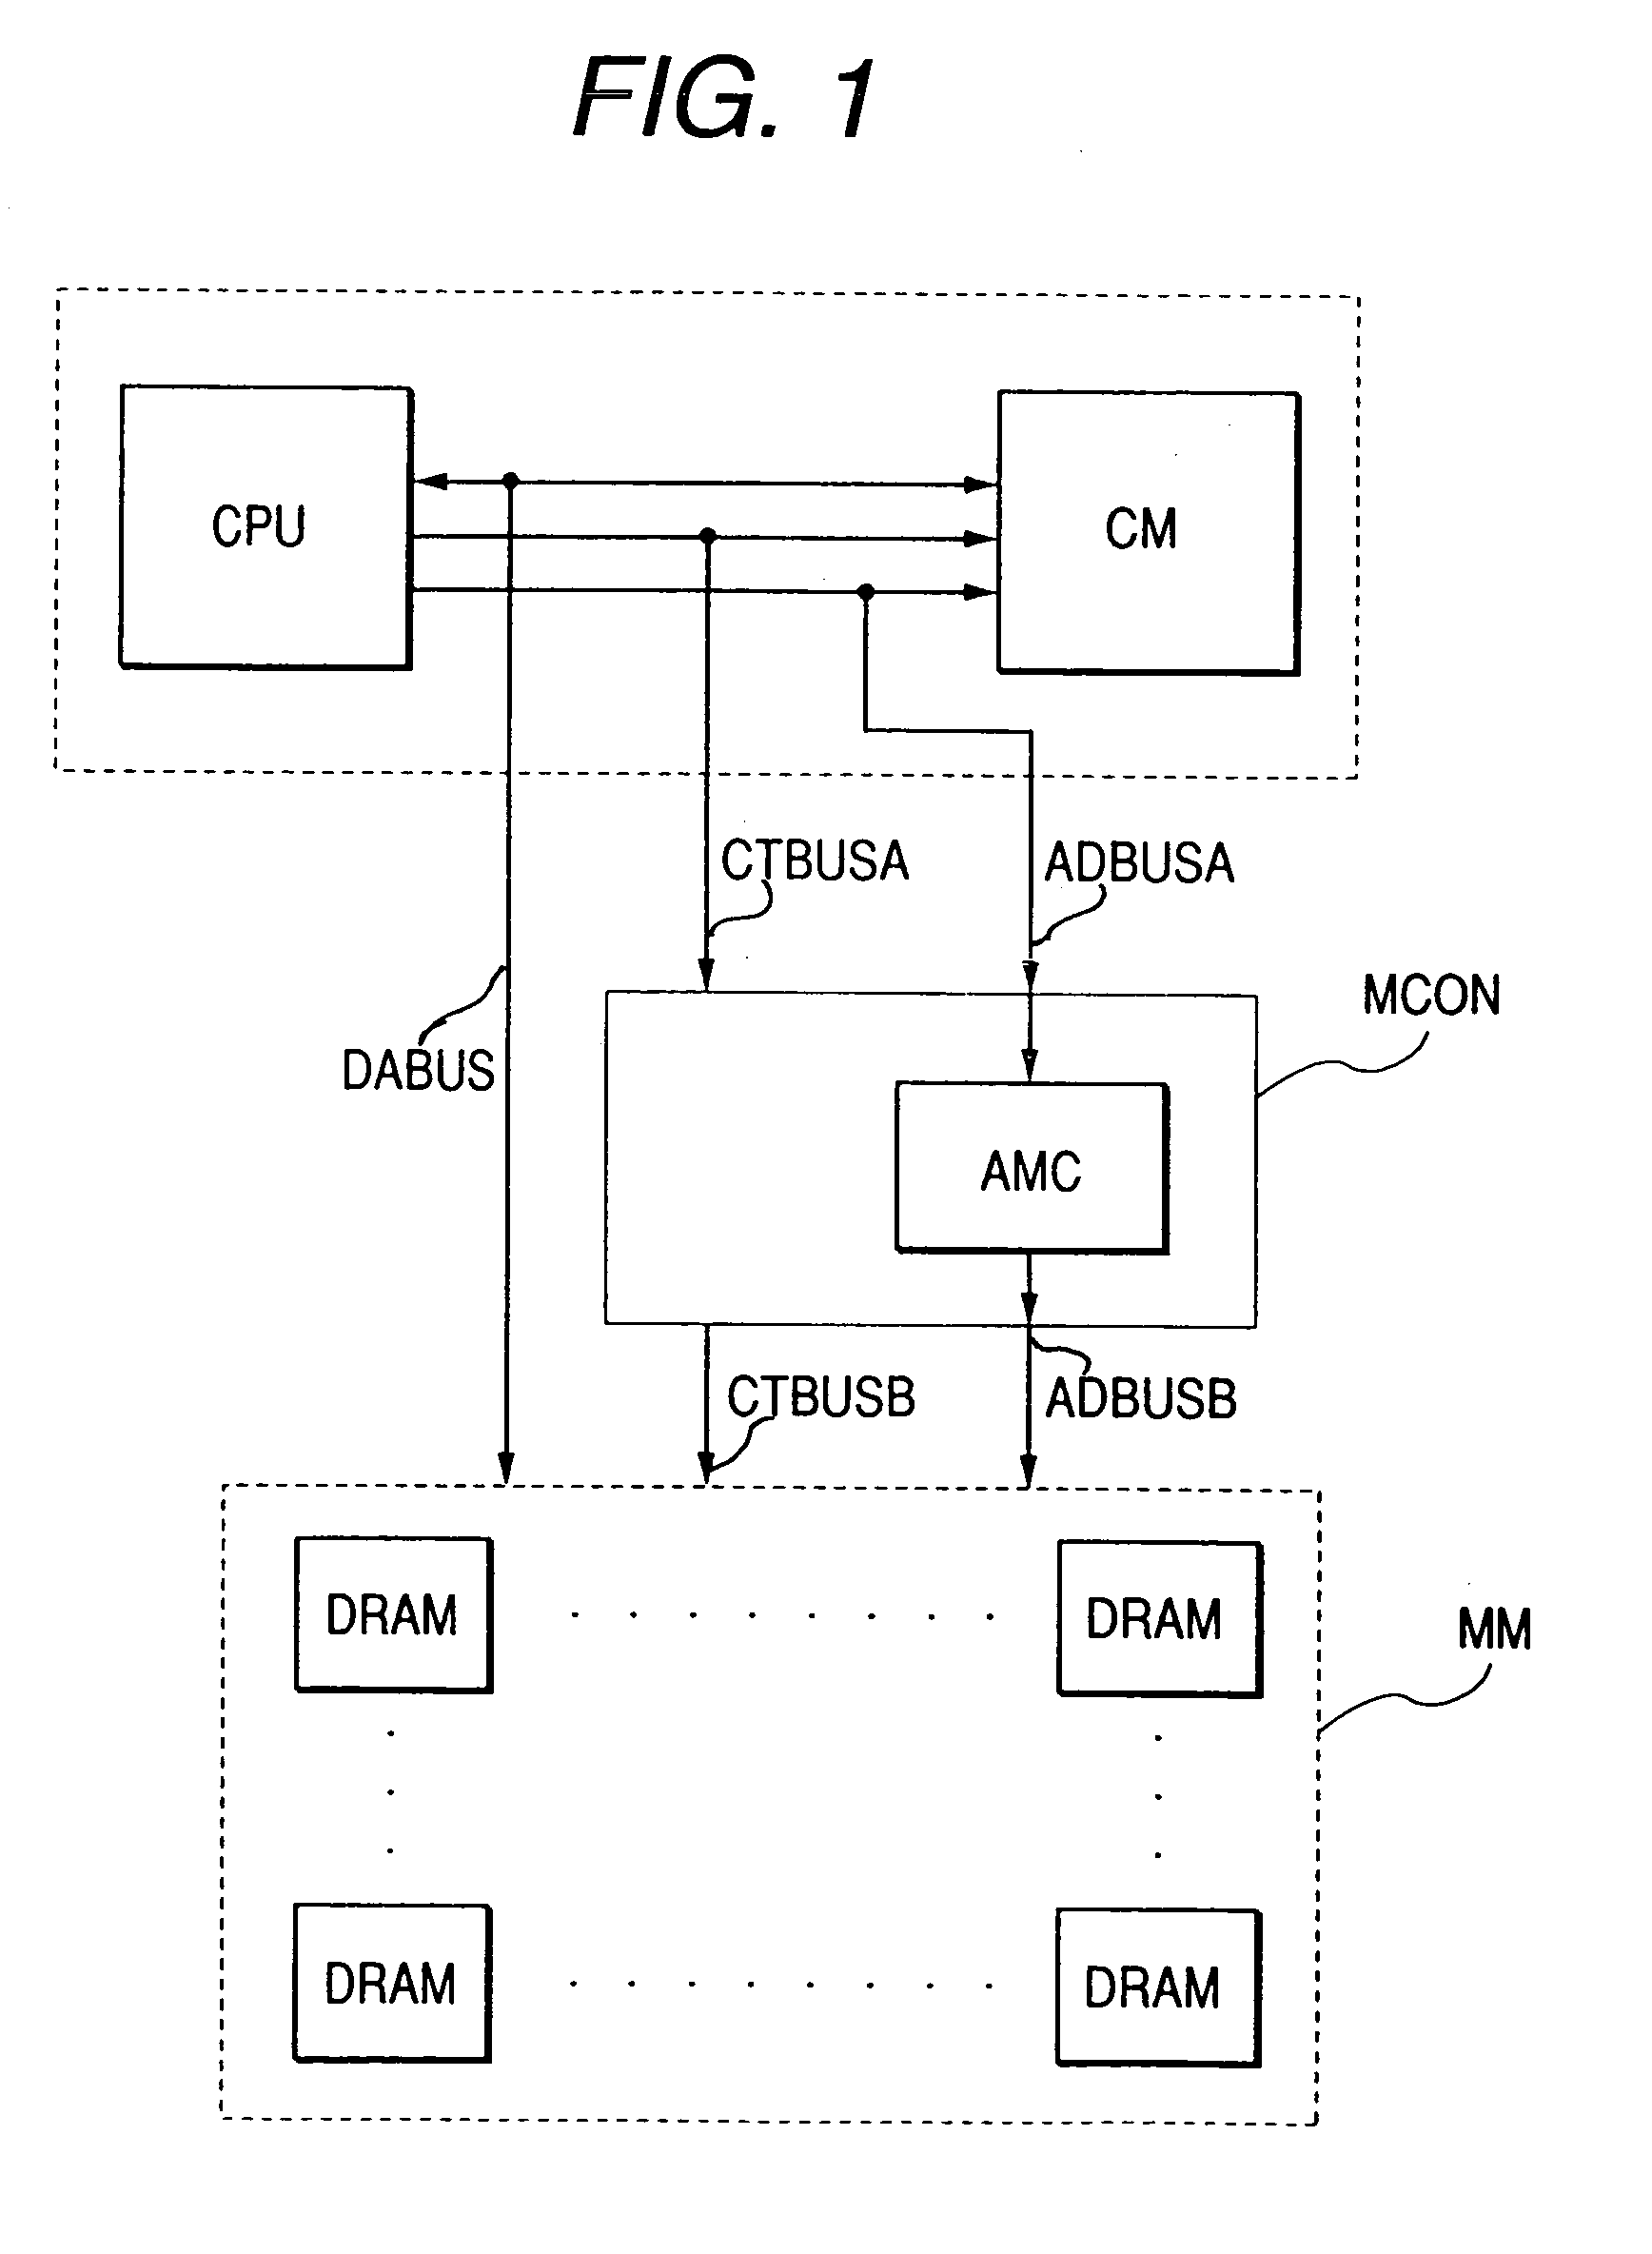 Information processing apparatus using index and TAG addresses for cache